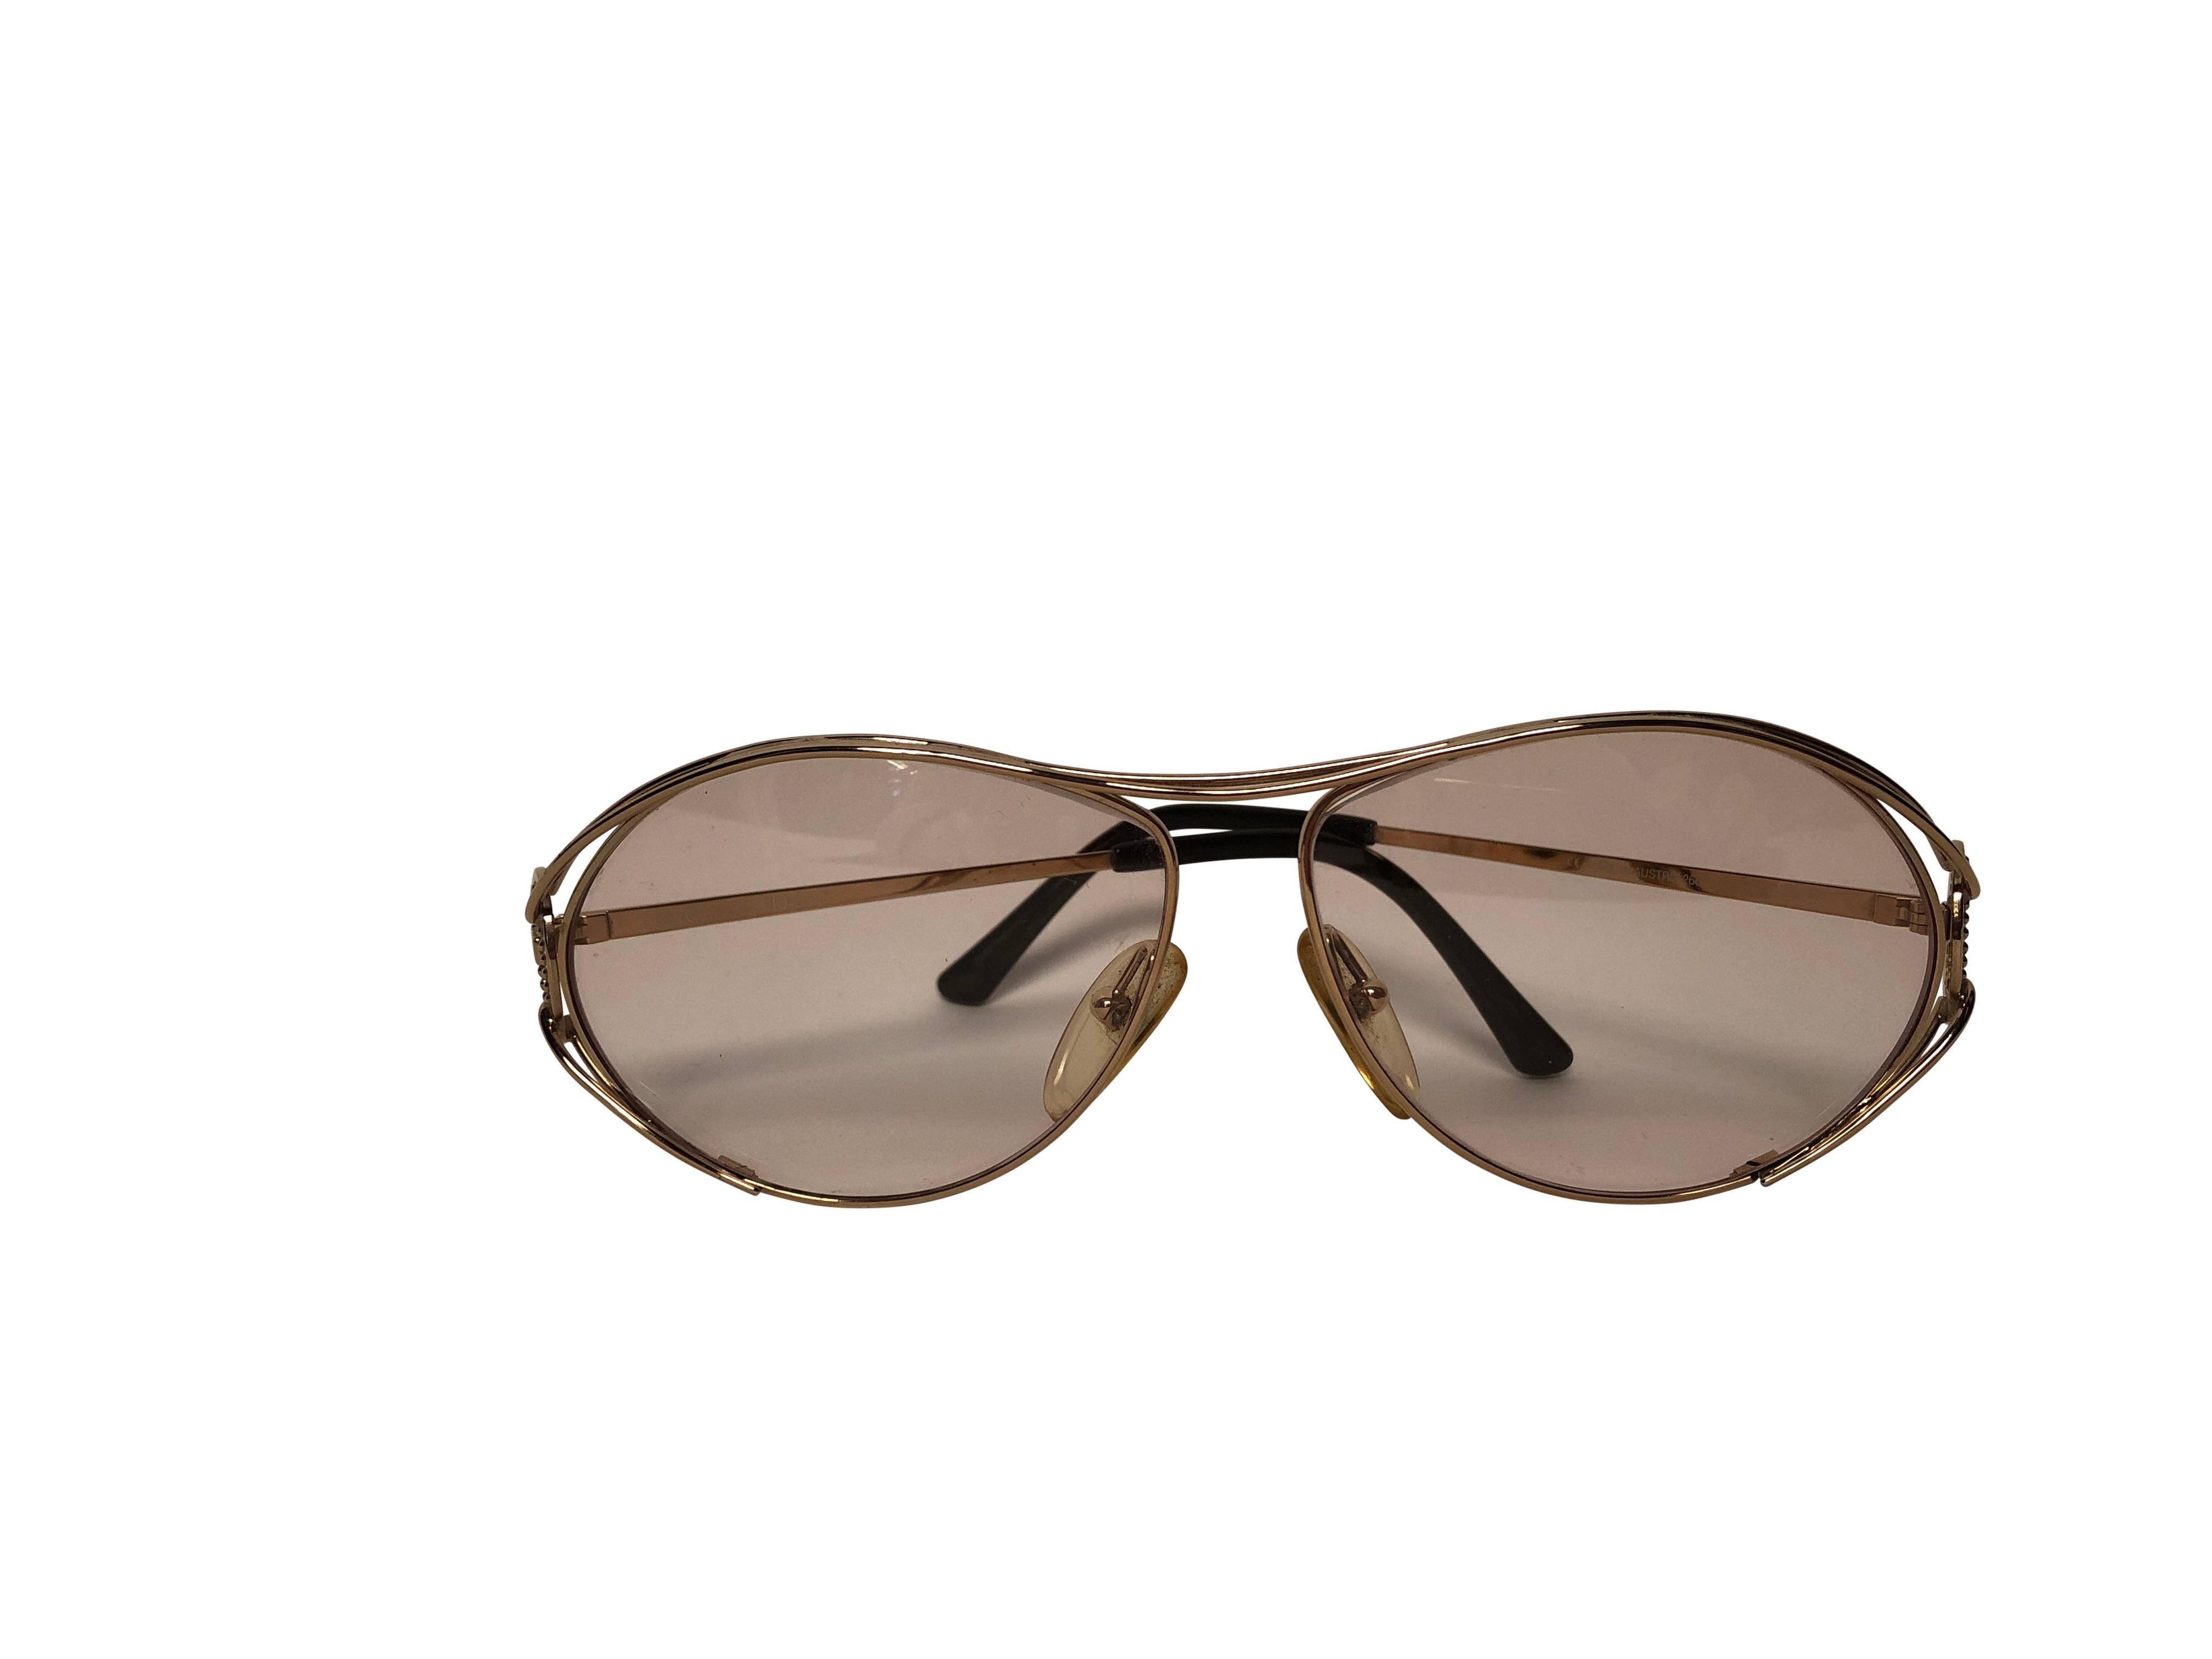 1980's Gold toned DIOR 2665 sunglasses with CD logo at temples.

Lens colour: 40 (clear, very slightly pink tinted)

Size: 58 12 125